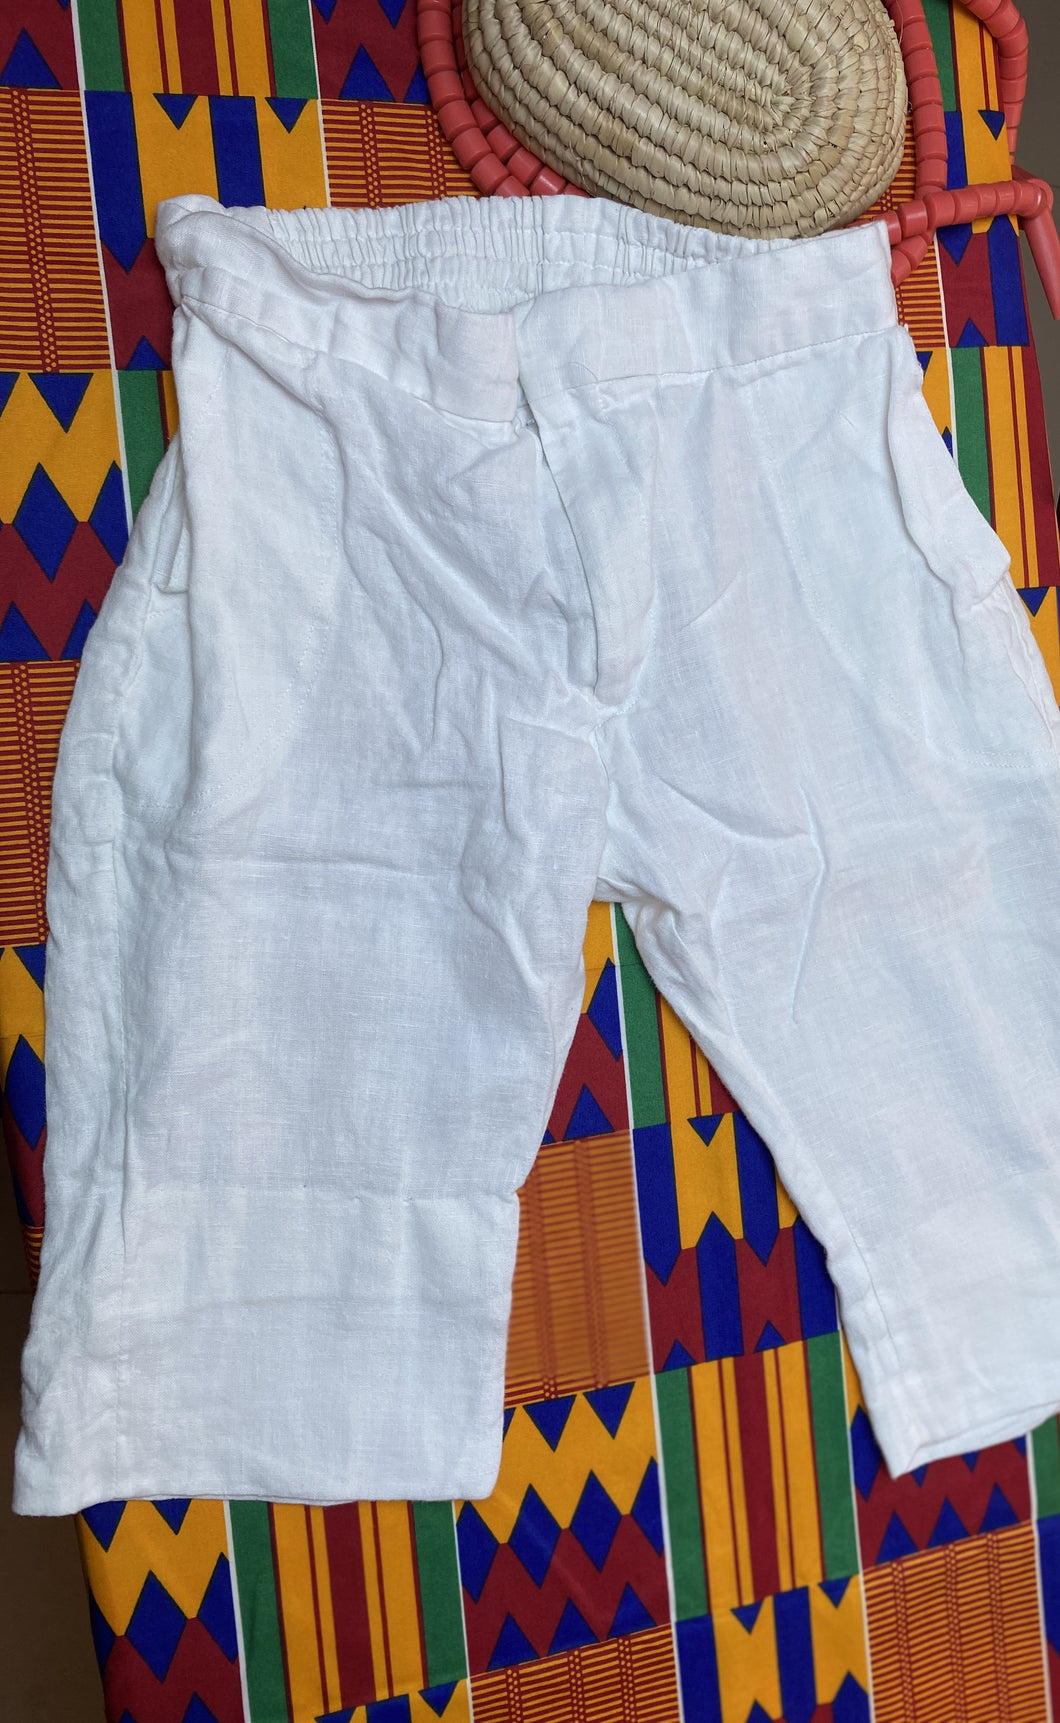 Cotton Linen White Shorts 5 to 7 years old